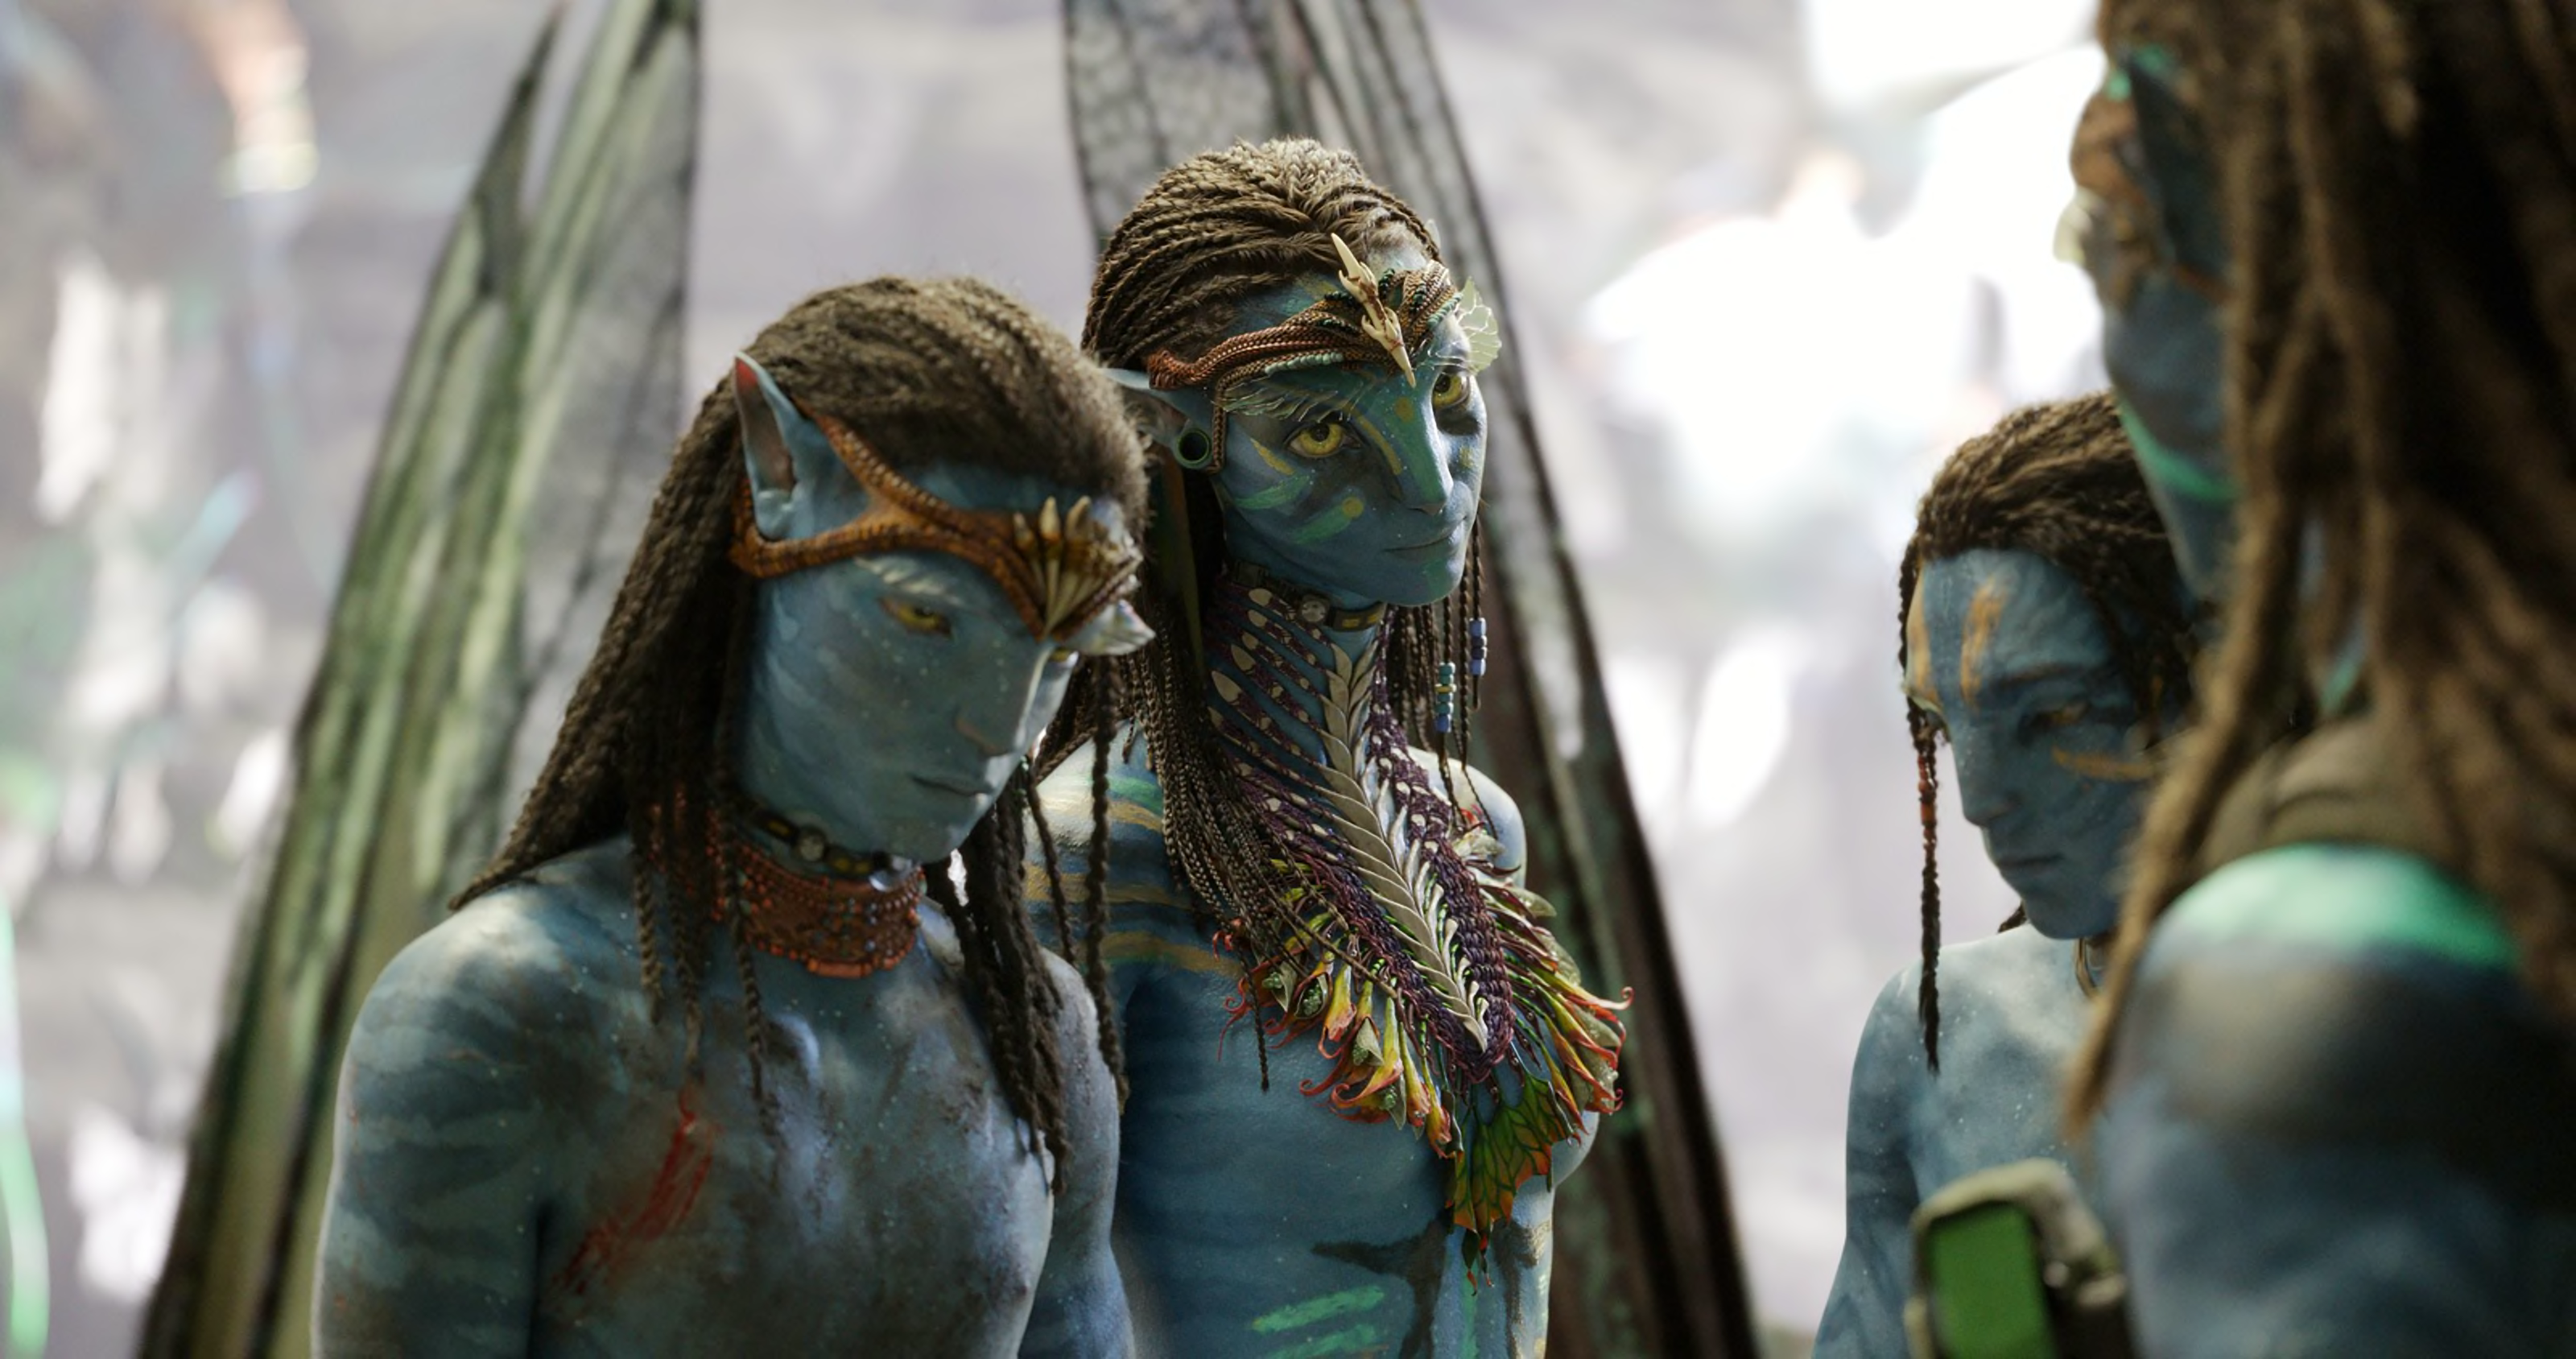 The Insane Film Technology Behind 'Avatar: The Way of Water